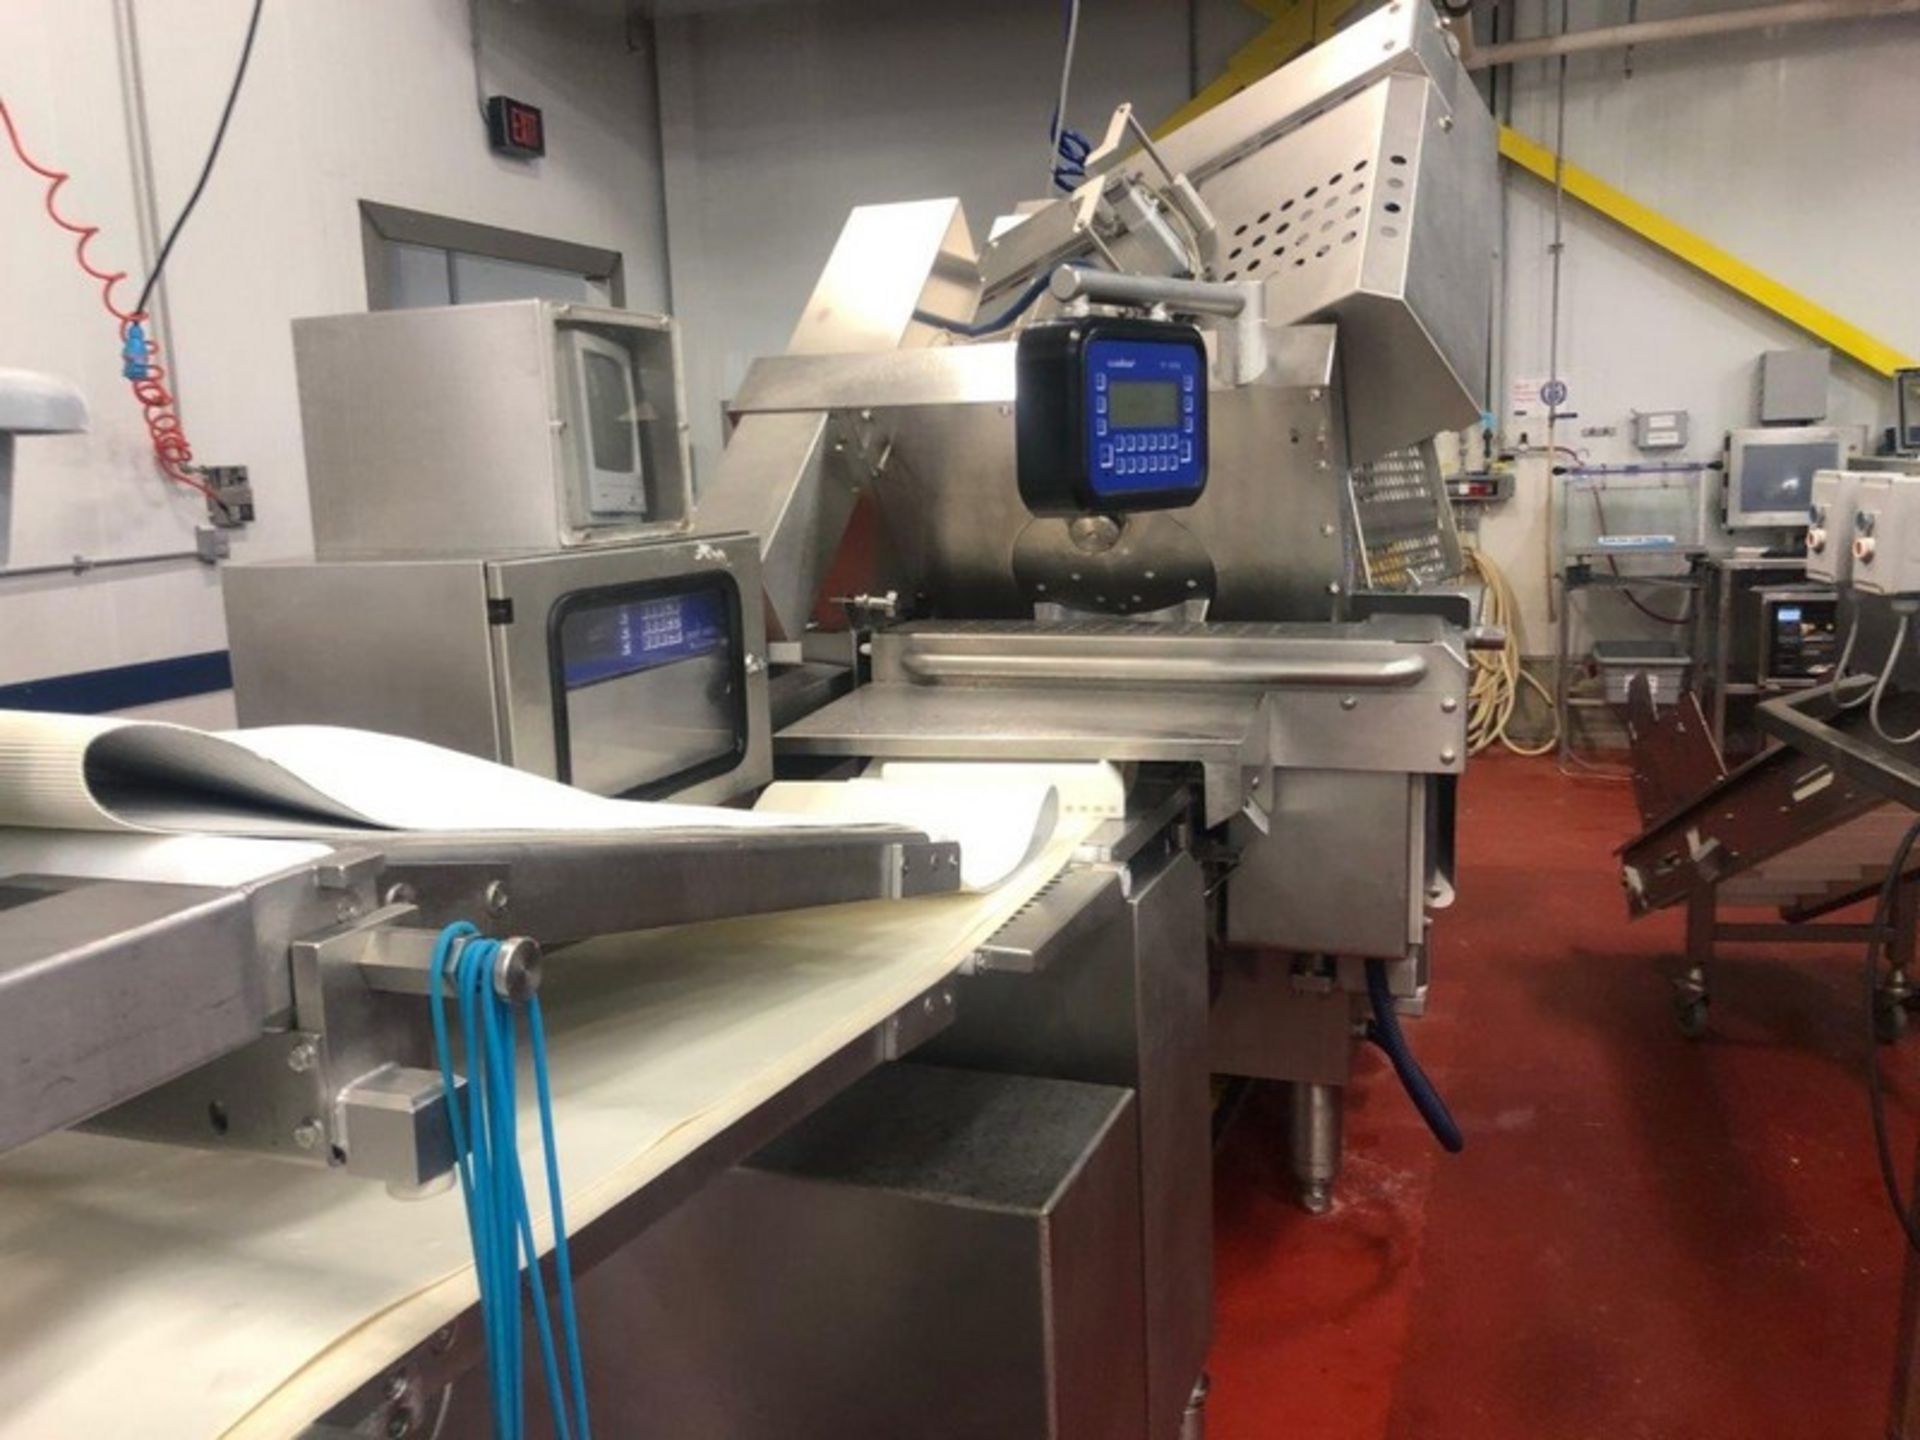 Weber Checkweigher, Model CCW/CCR, S/N 6335 with CCR Reject Station, Dimensions Aprox. 39: L x 36" W - Image 10 of 10